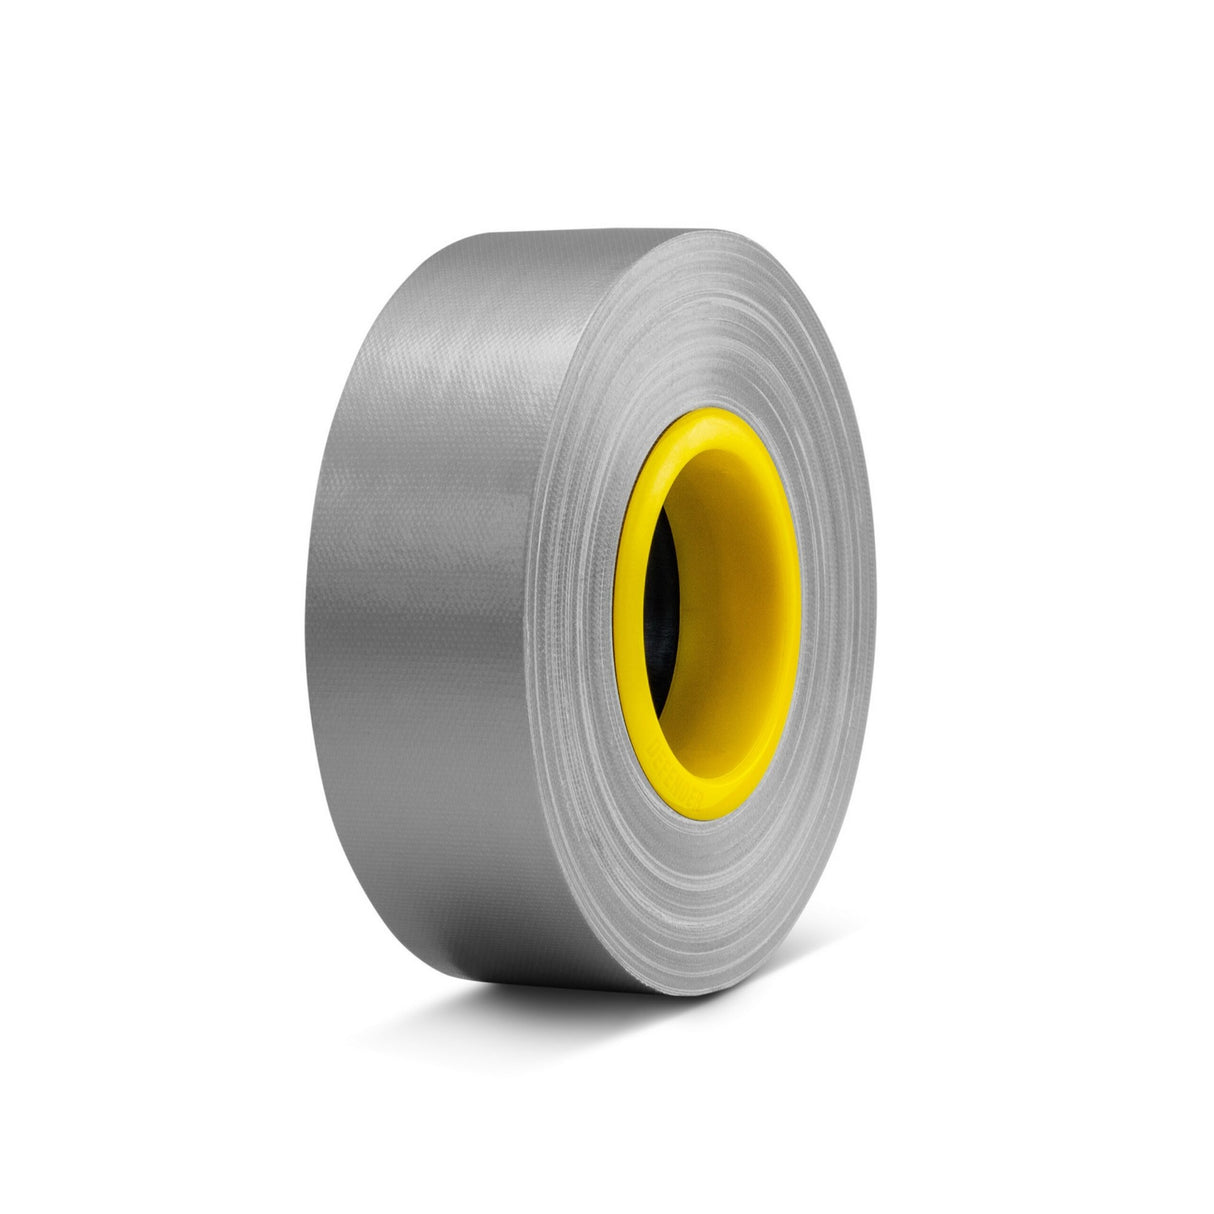 Defender T EXA S 50 EXA-TAPE with ERGO-Core Silver Glossy, 50mm x 50m